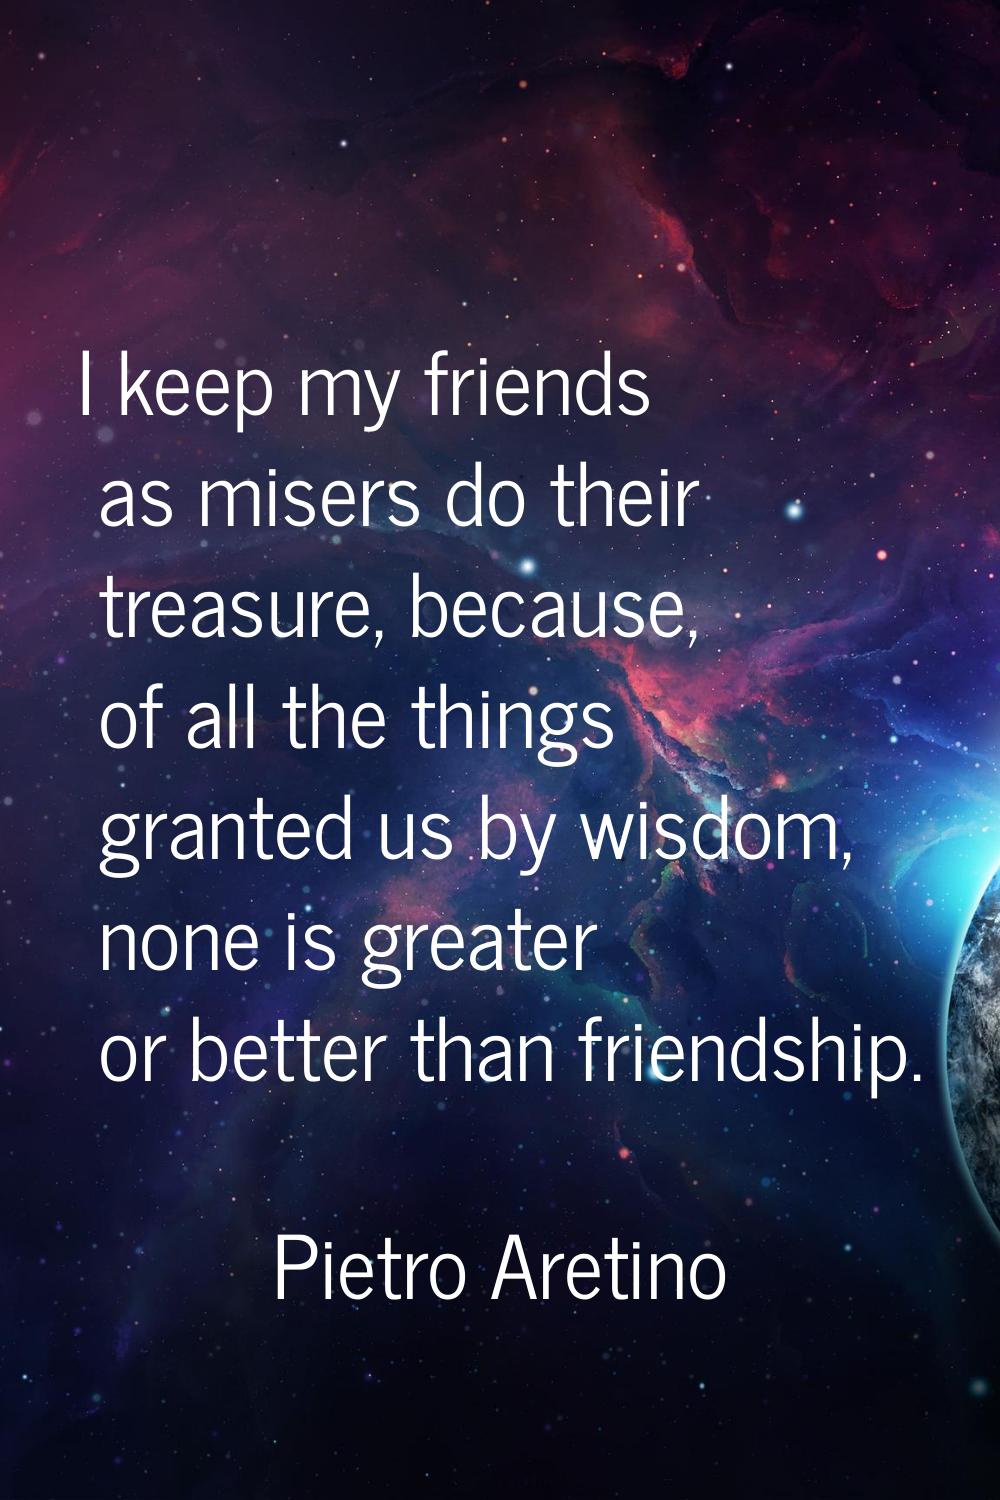 I keep my friends as misers do their treasure, because, of all the things granted us by wisdom, non